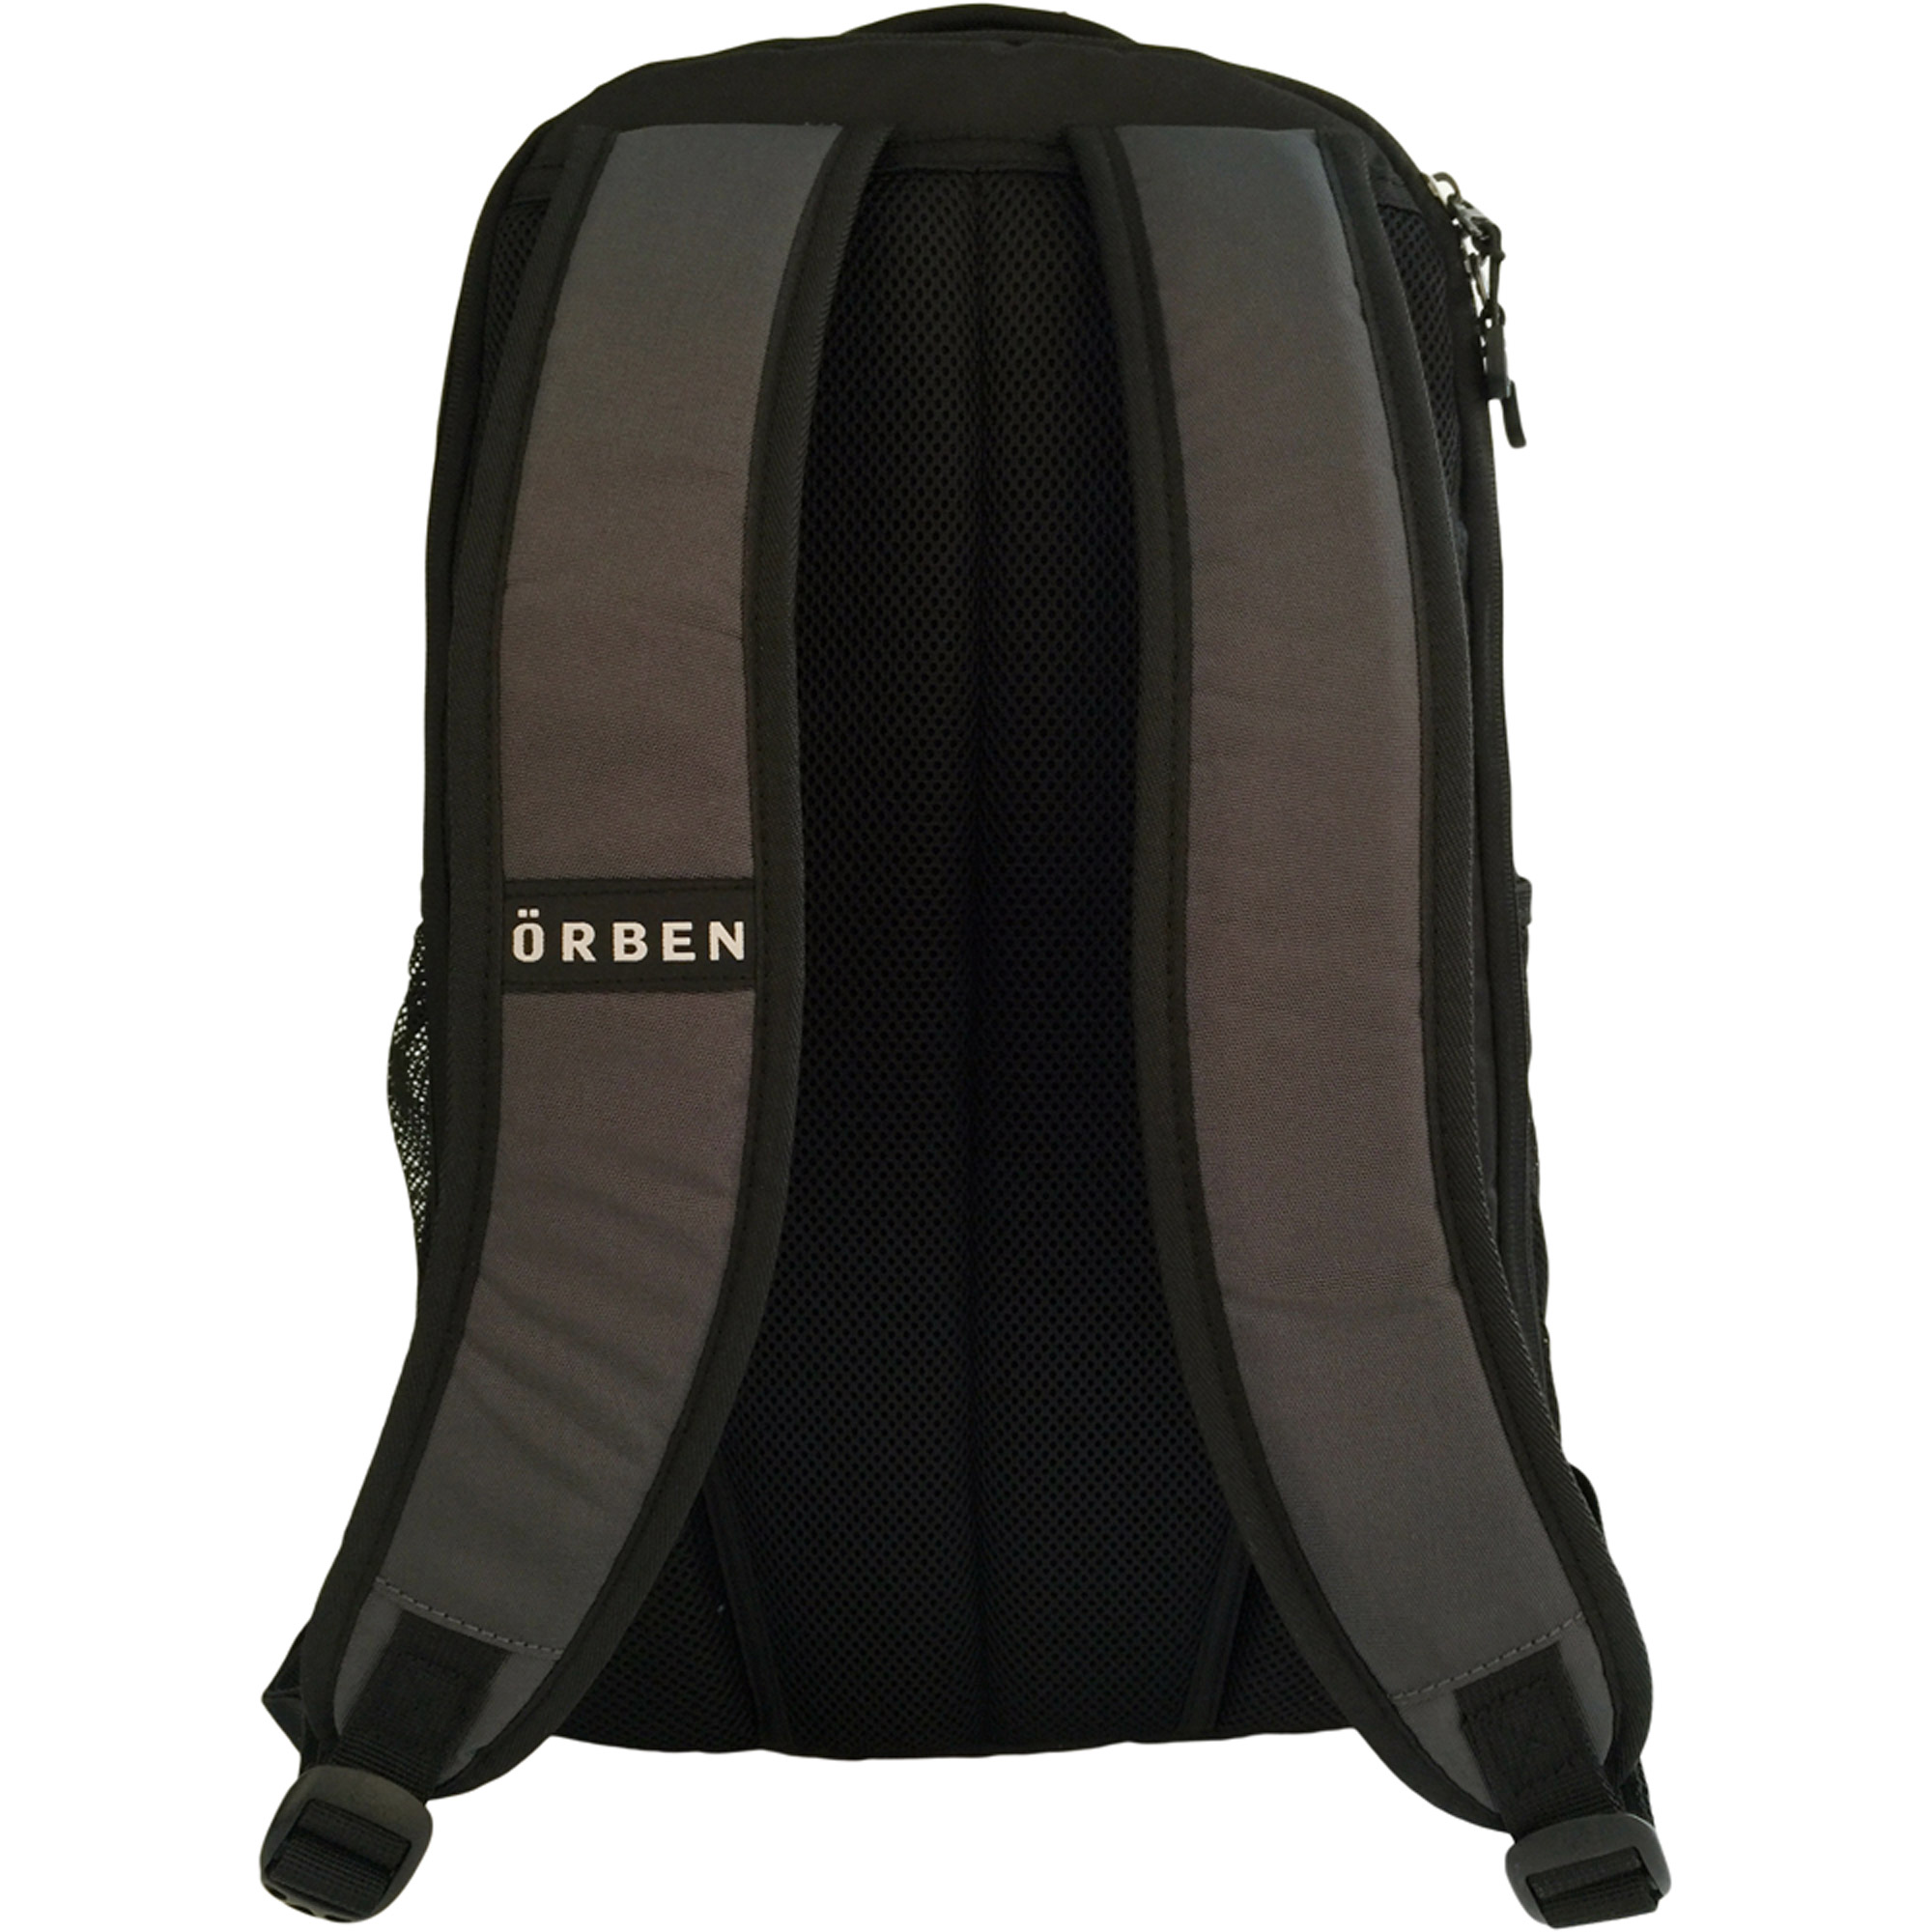 ORBEN Vertical Zip Laptop Backpack, Large Compartment Fits 15